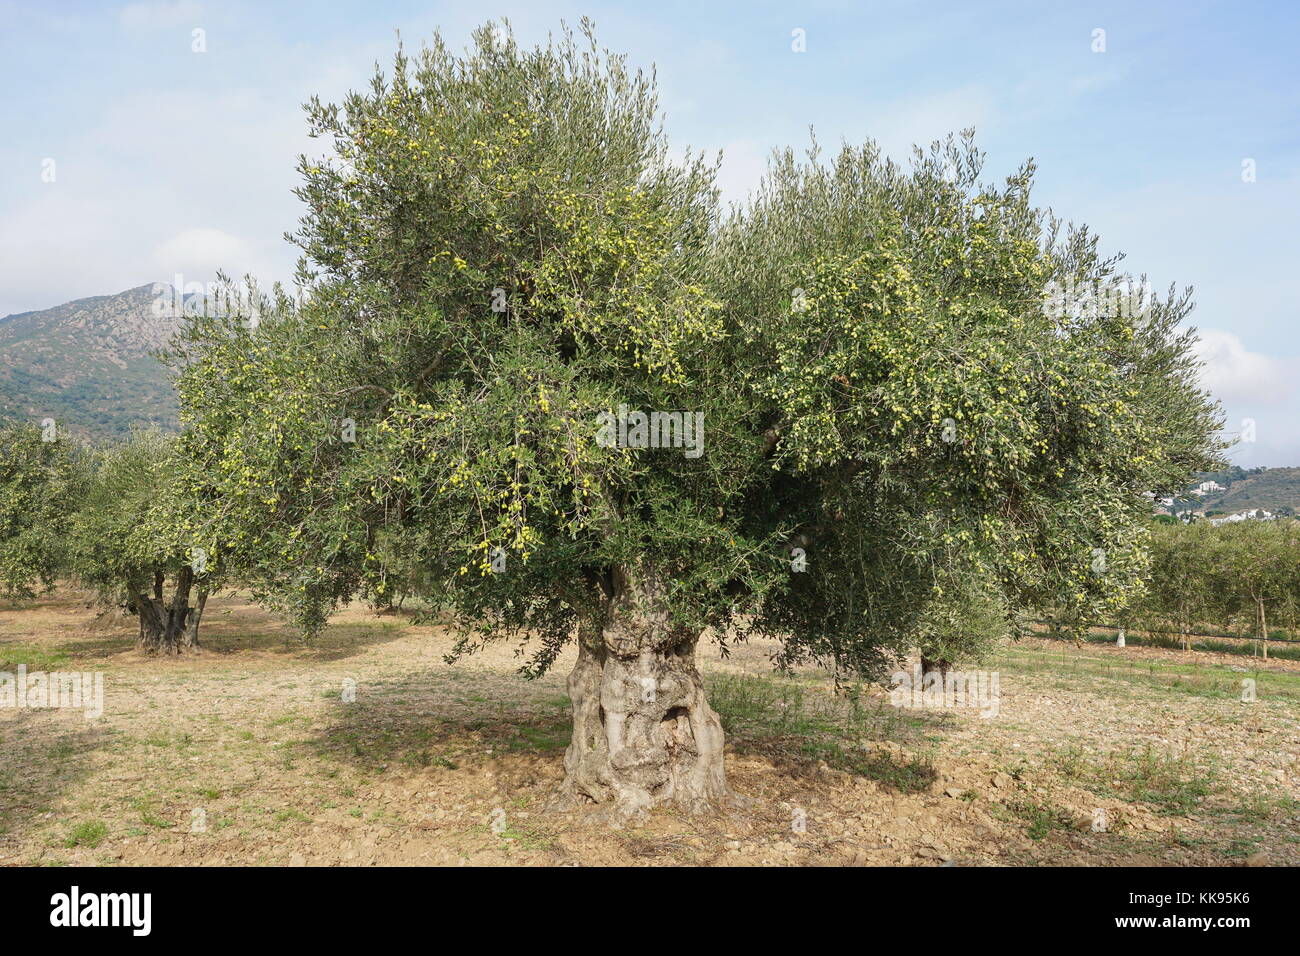 An olive tree with fruits in a field in Spain, Mediterranean, Roses, Girona, Catalonia, Alt Emporda Stock Photo